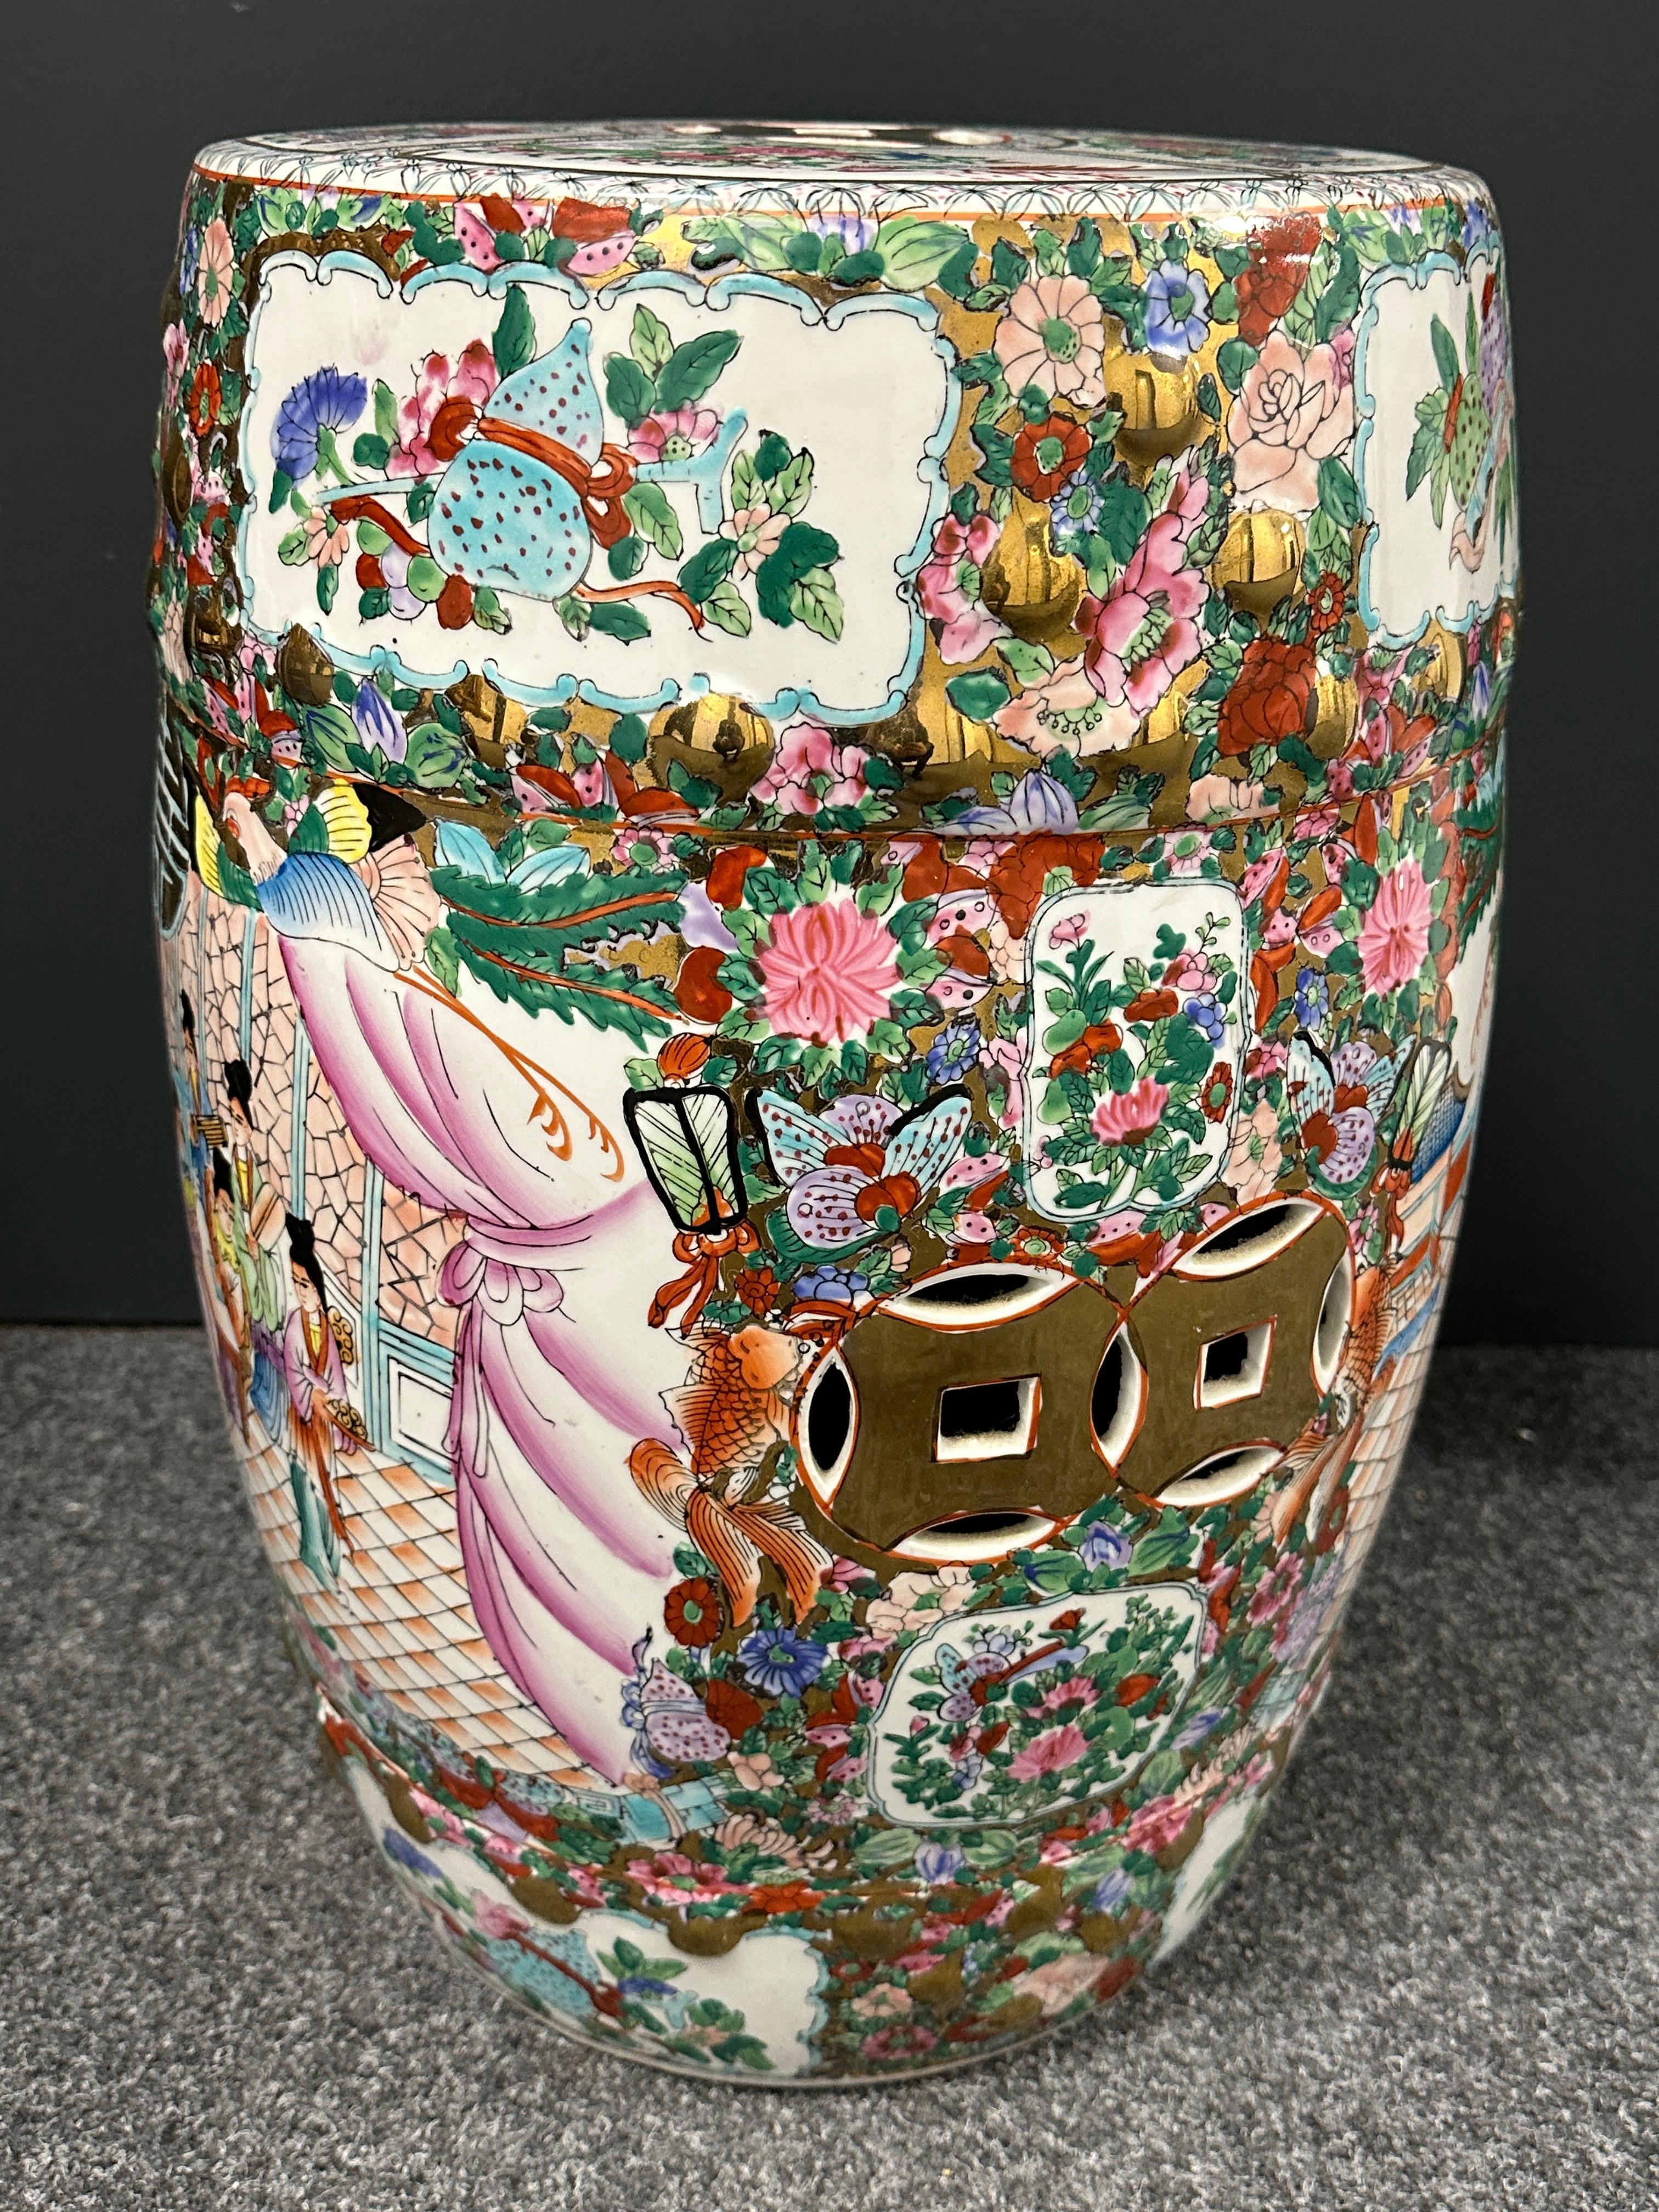 Mid-20th century Chinese export hand painted porcelain multicolored garden stool or flower pot seat. This lovely piece has a Chinese or Japanese landscape motif. Features raised dot detail and Chinese geometric cut-out symbols on the sides and